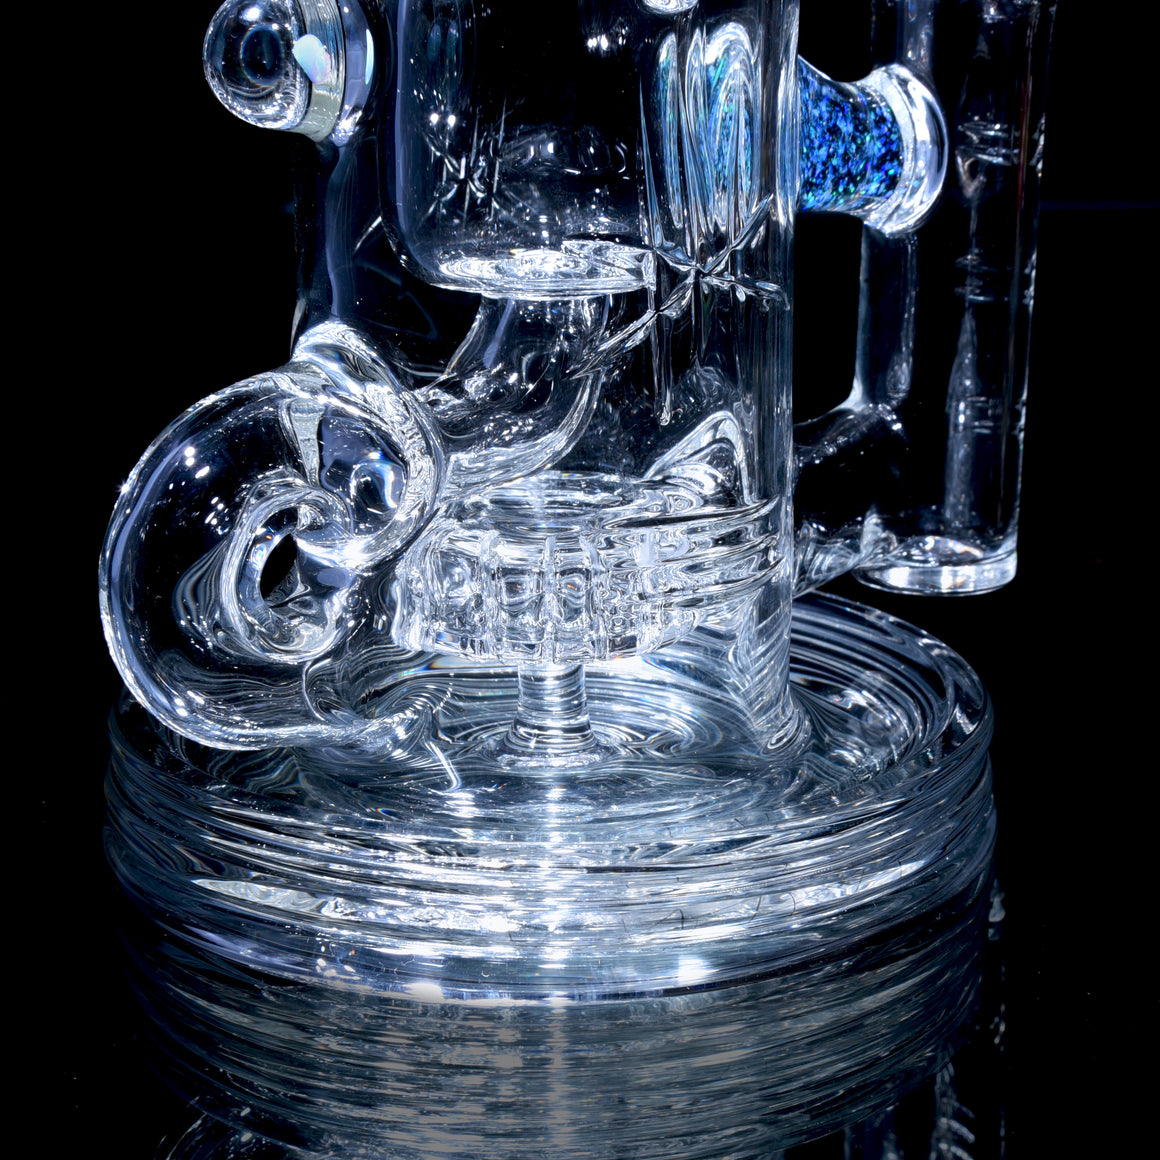 Double-Maria Crystalo Carved Klein Recycler w/ Gridded Perc - 14mm Female